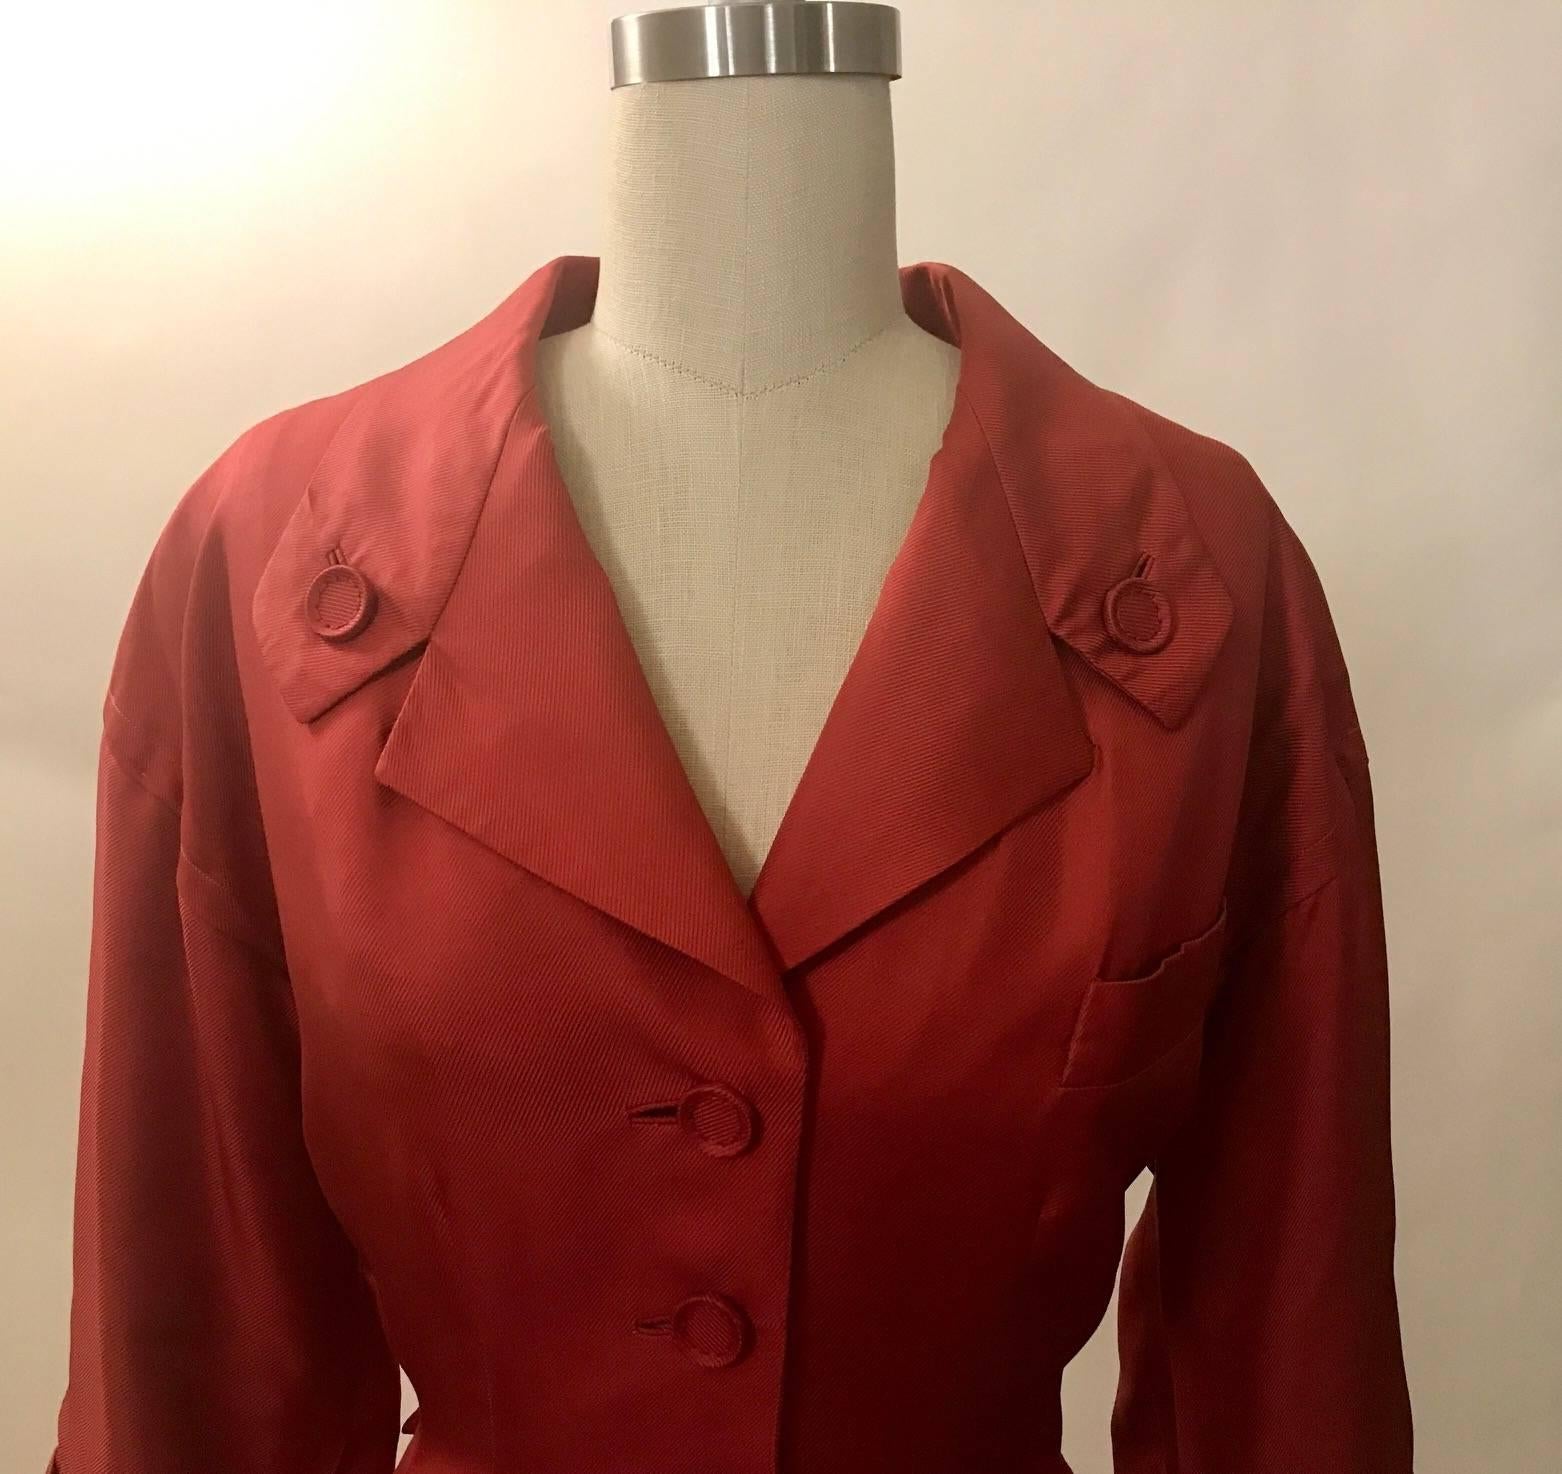 Christian Dior New York Original Early 1950s Red Silk Pencil Skirt Suit 2